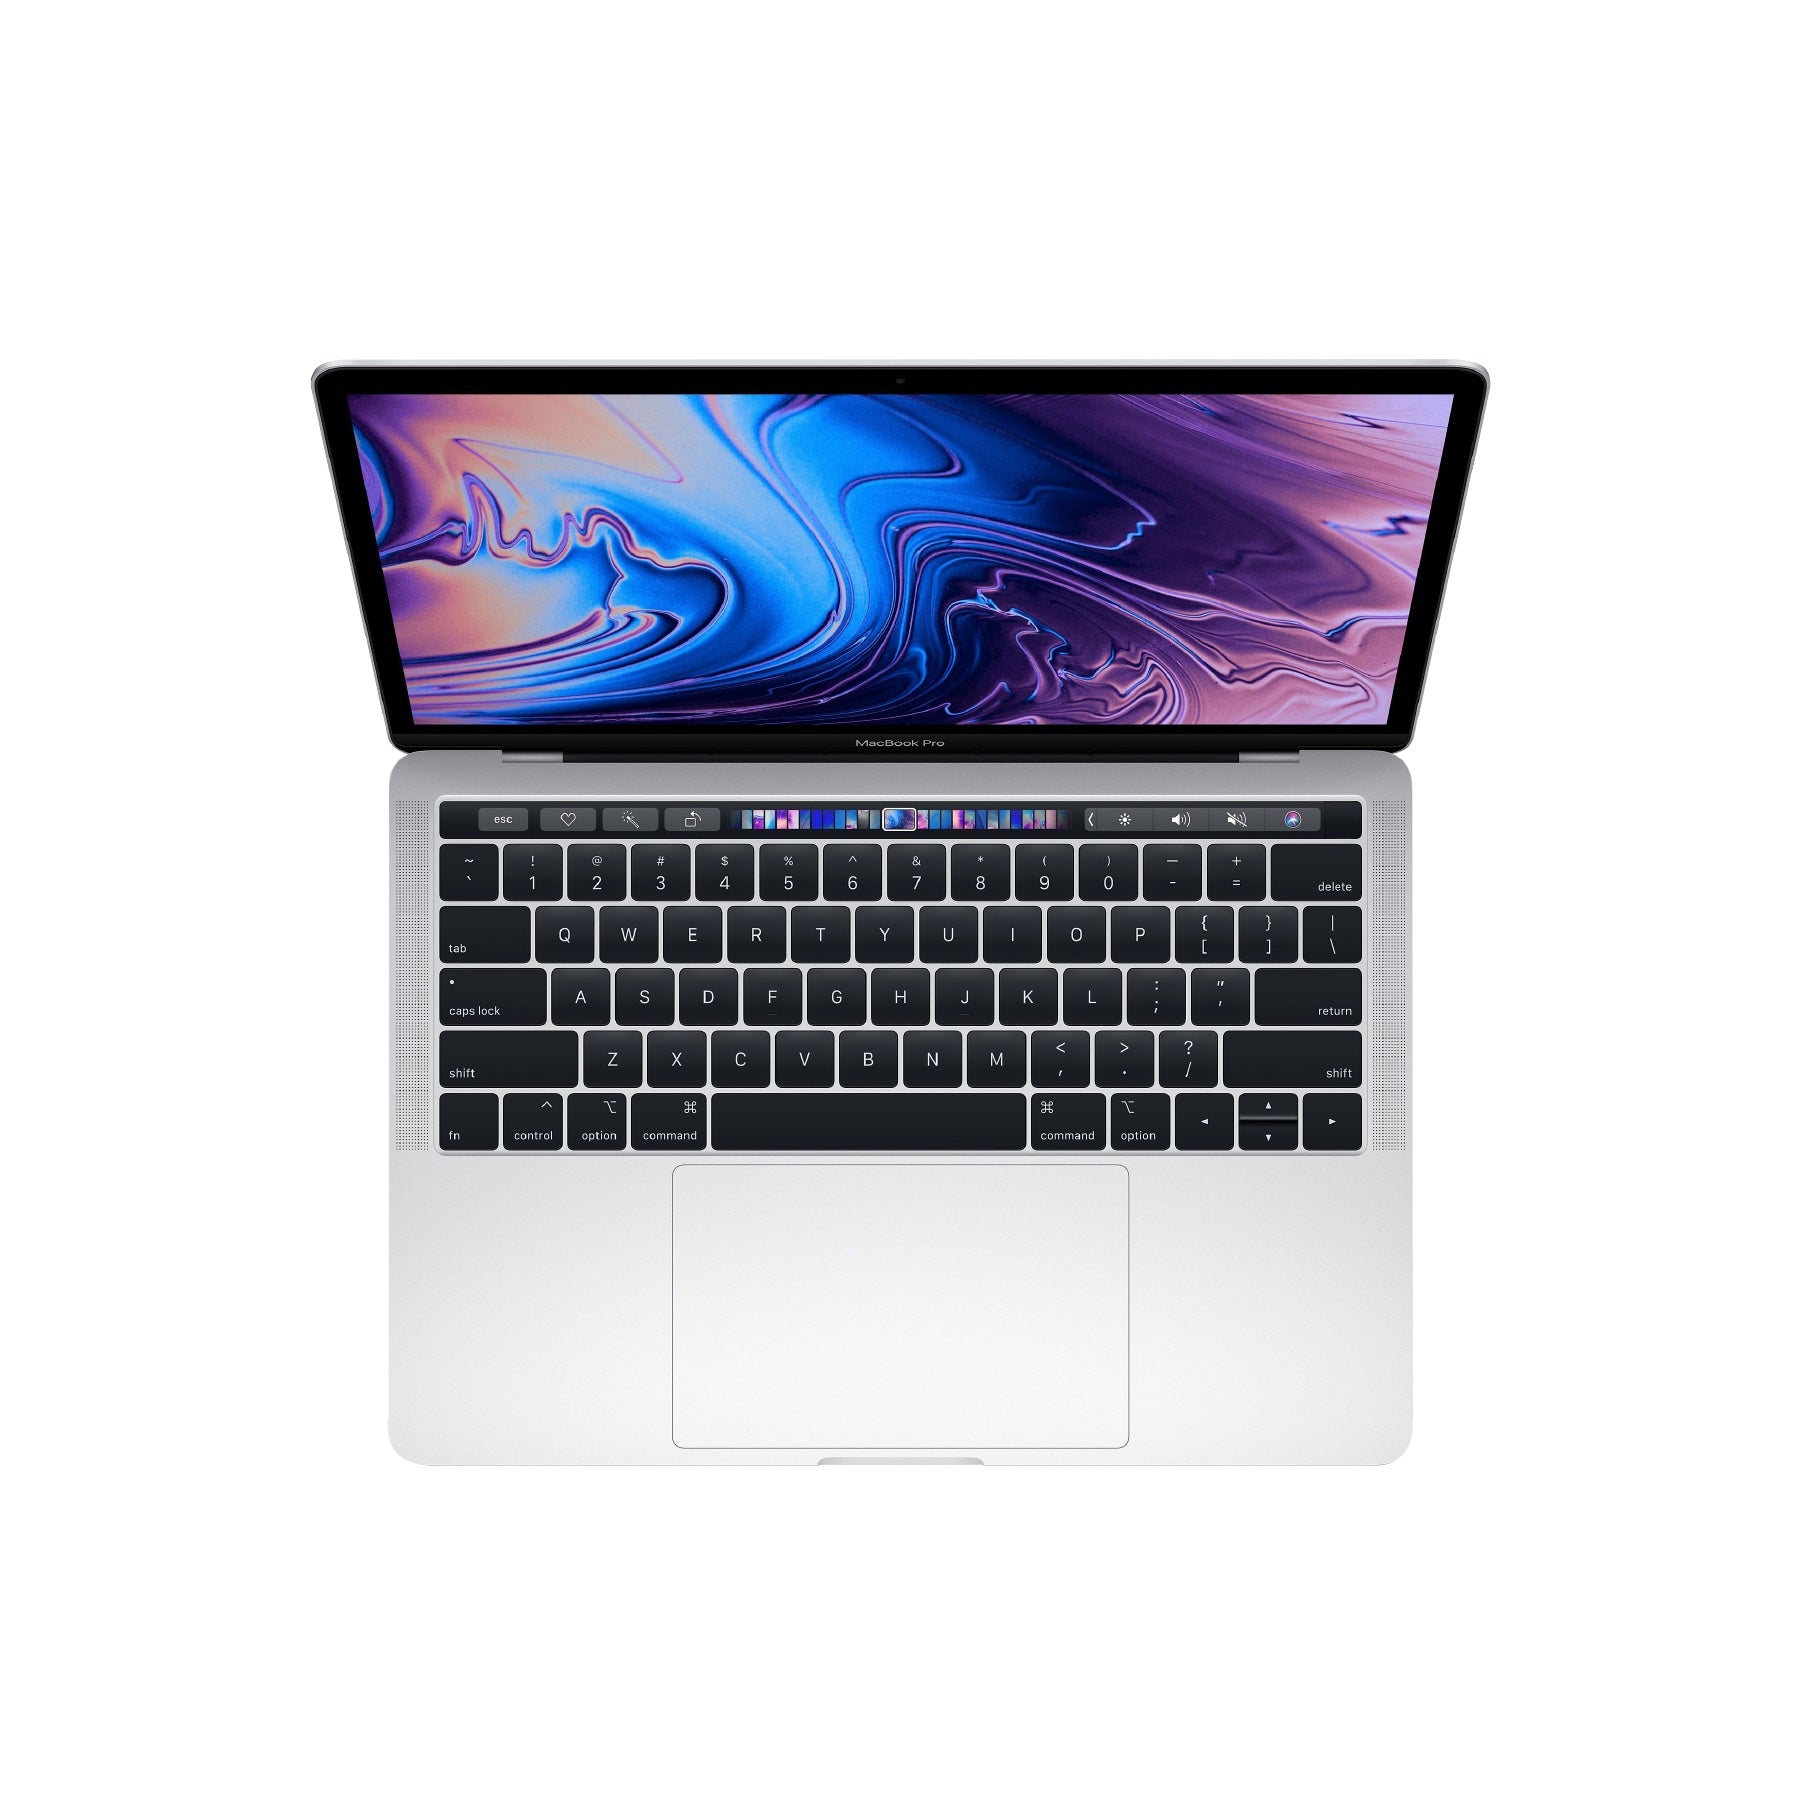 MacBook Pro (15-inch, 2019) 2.3 GHz, Intel Core i9, 512GB - Silver (Better) - iStore Pre-owned